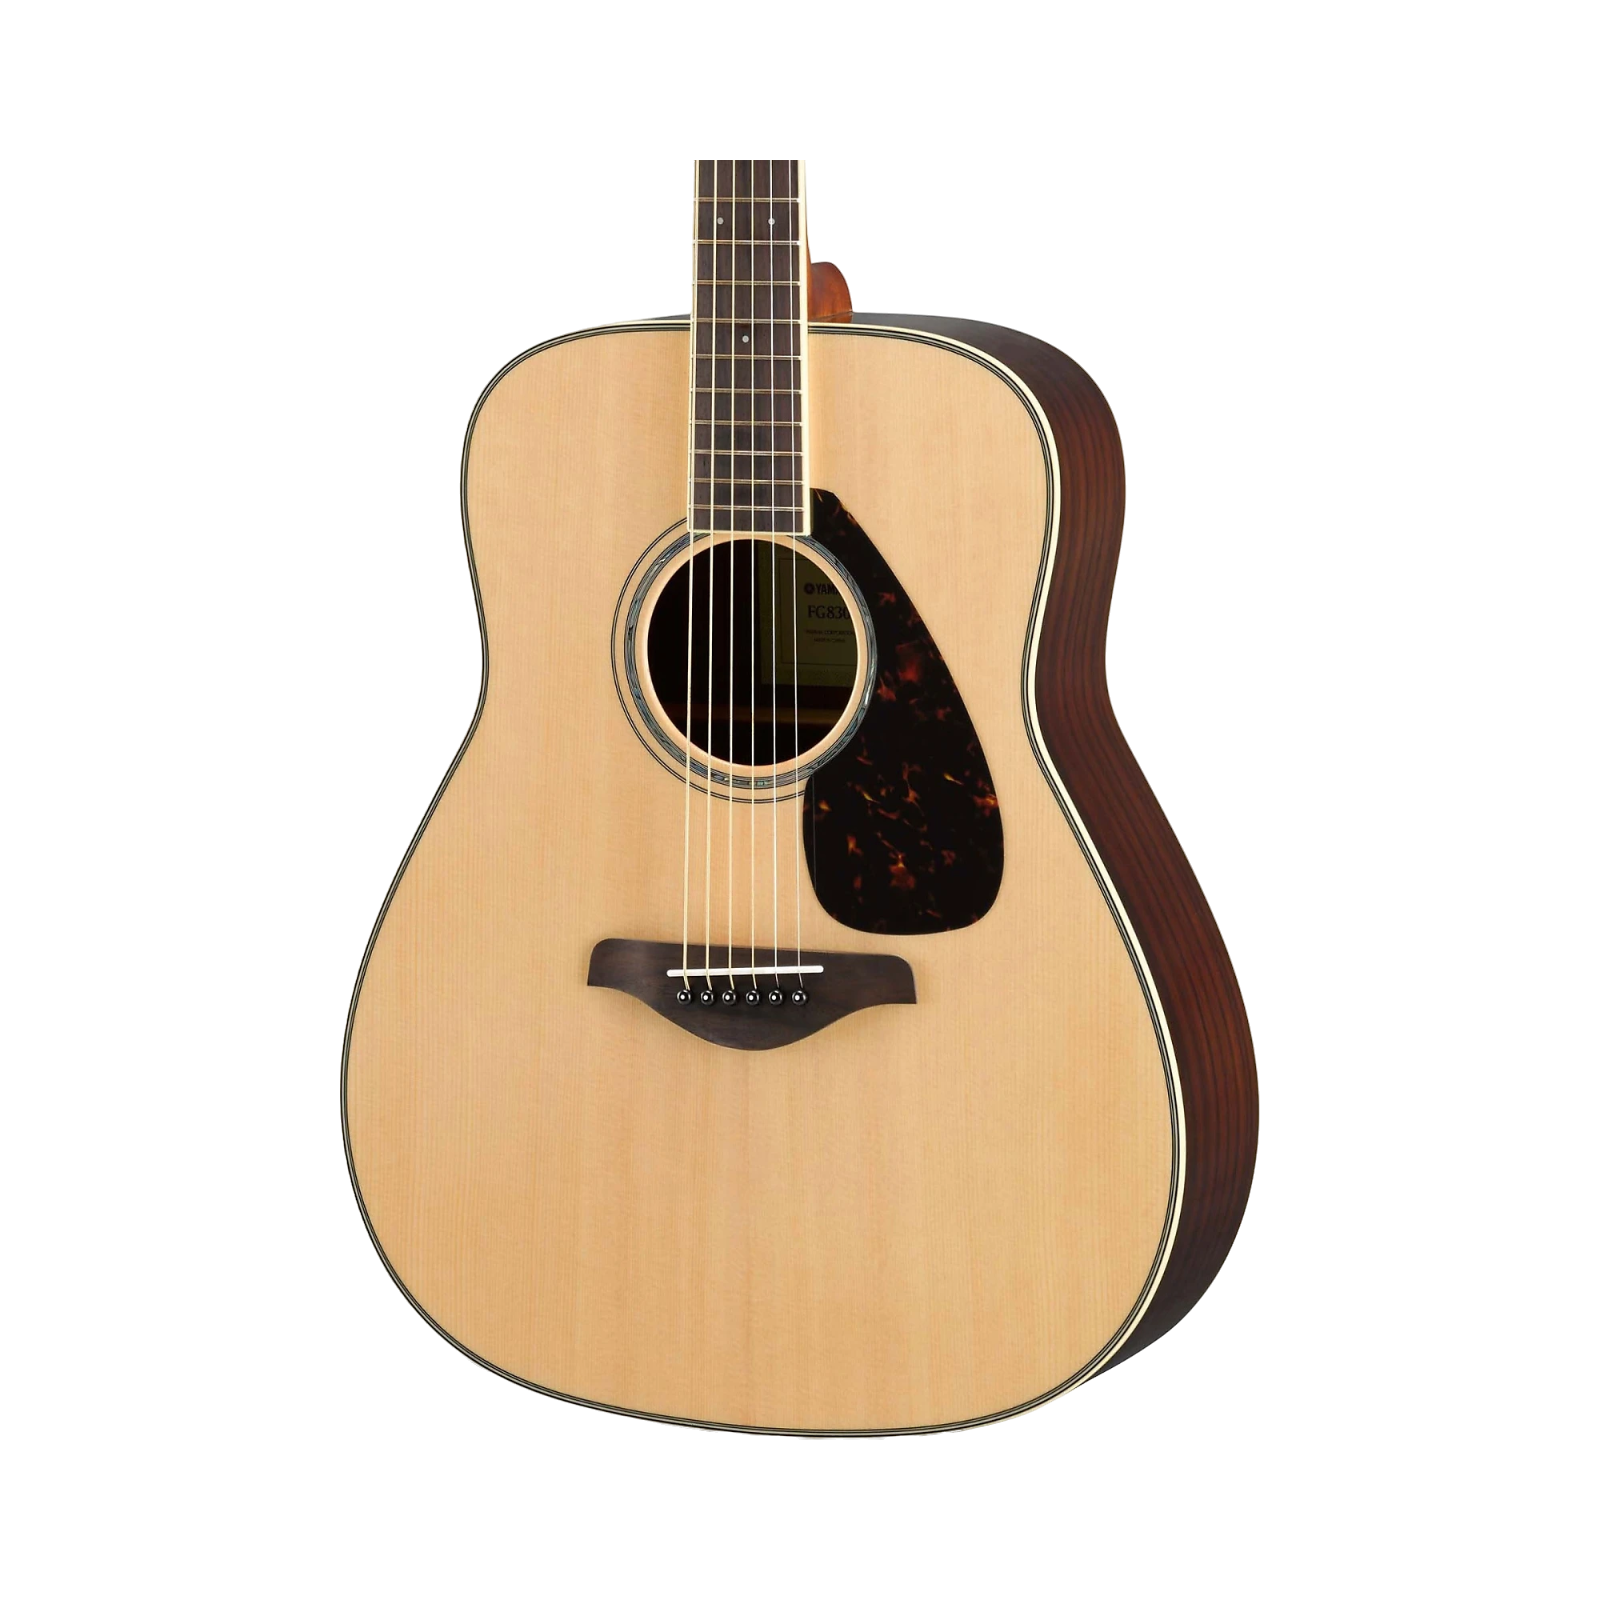 Yamaha Folk Guitar, Solid Sitka Spruce Top, Rosewood Back & Sides, Die Cast Chrome Tuners, Natural